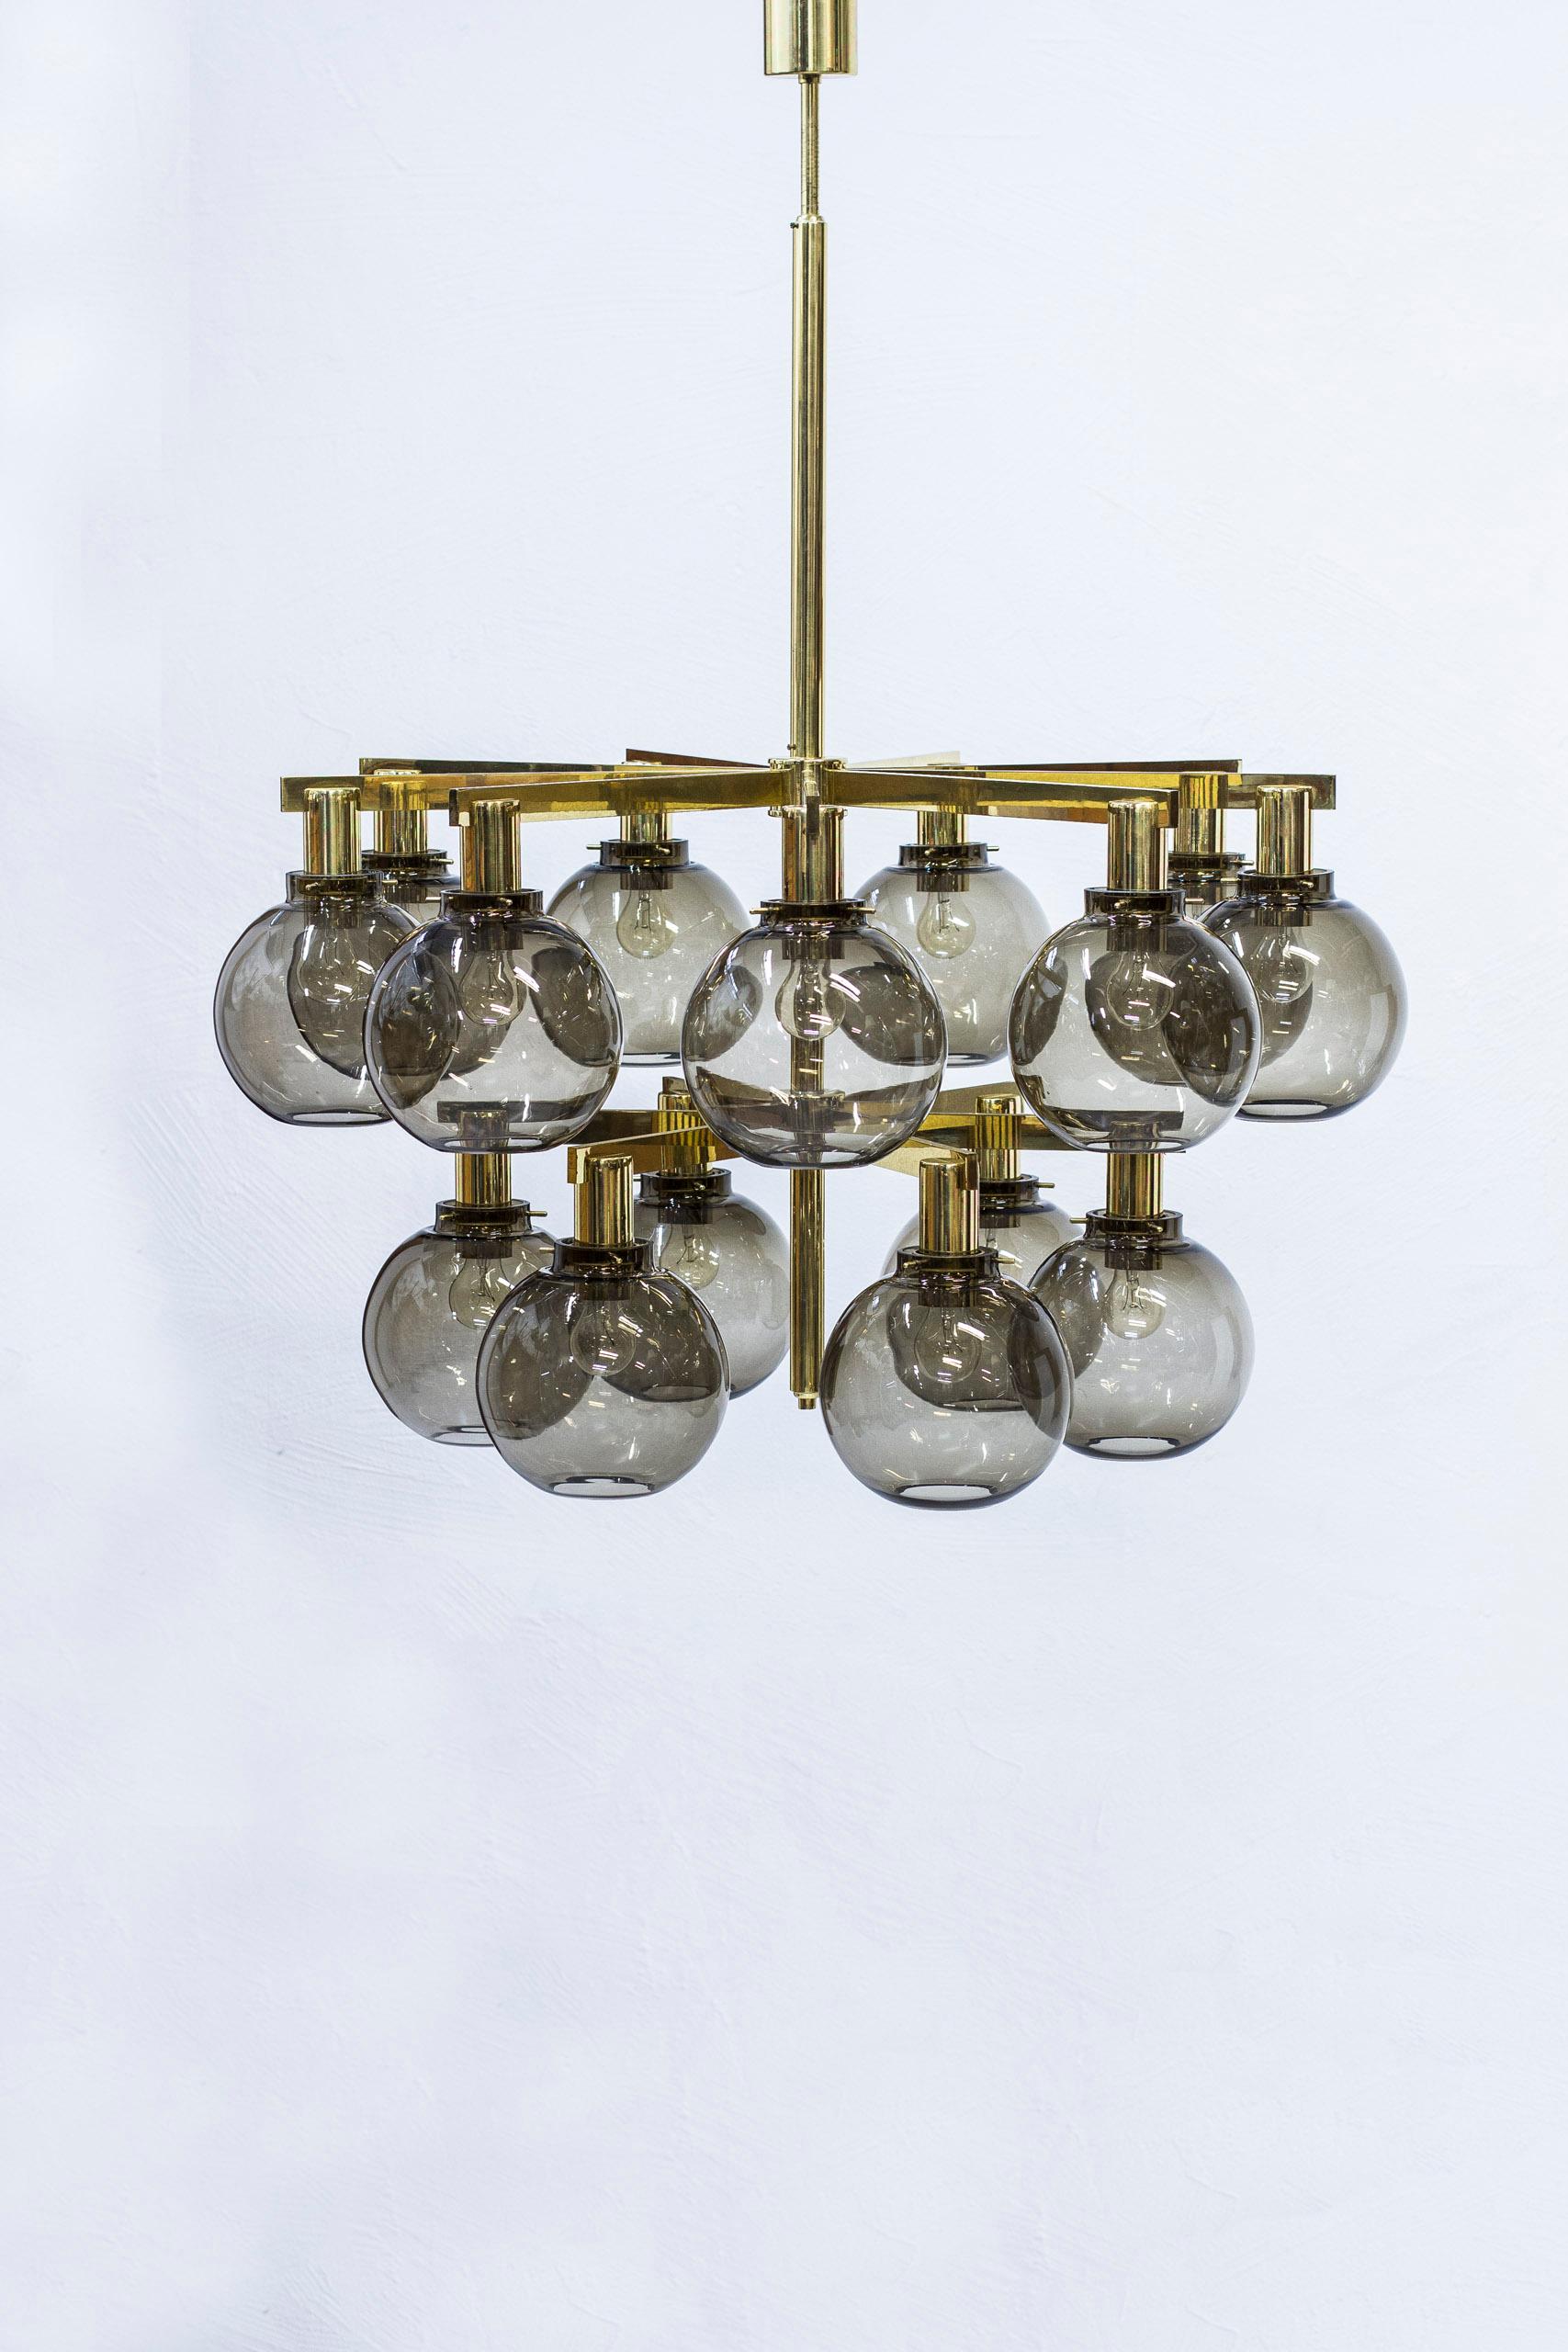 Large chandeliers designed by Hans-Agne Jakobsson during the 1960s. Produced in Sweden by his own company in Markaryd. Fifteen arms of polished brass with smoke colored glass shades. Very good vintage condition with light wear and age related